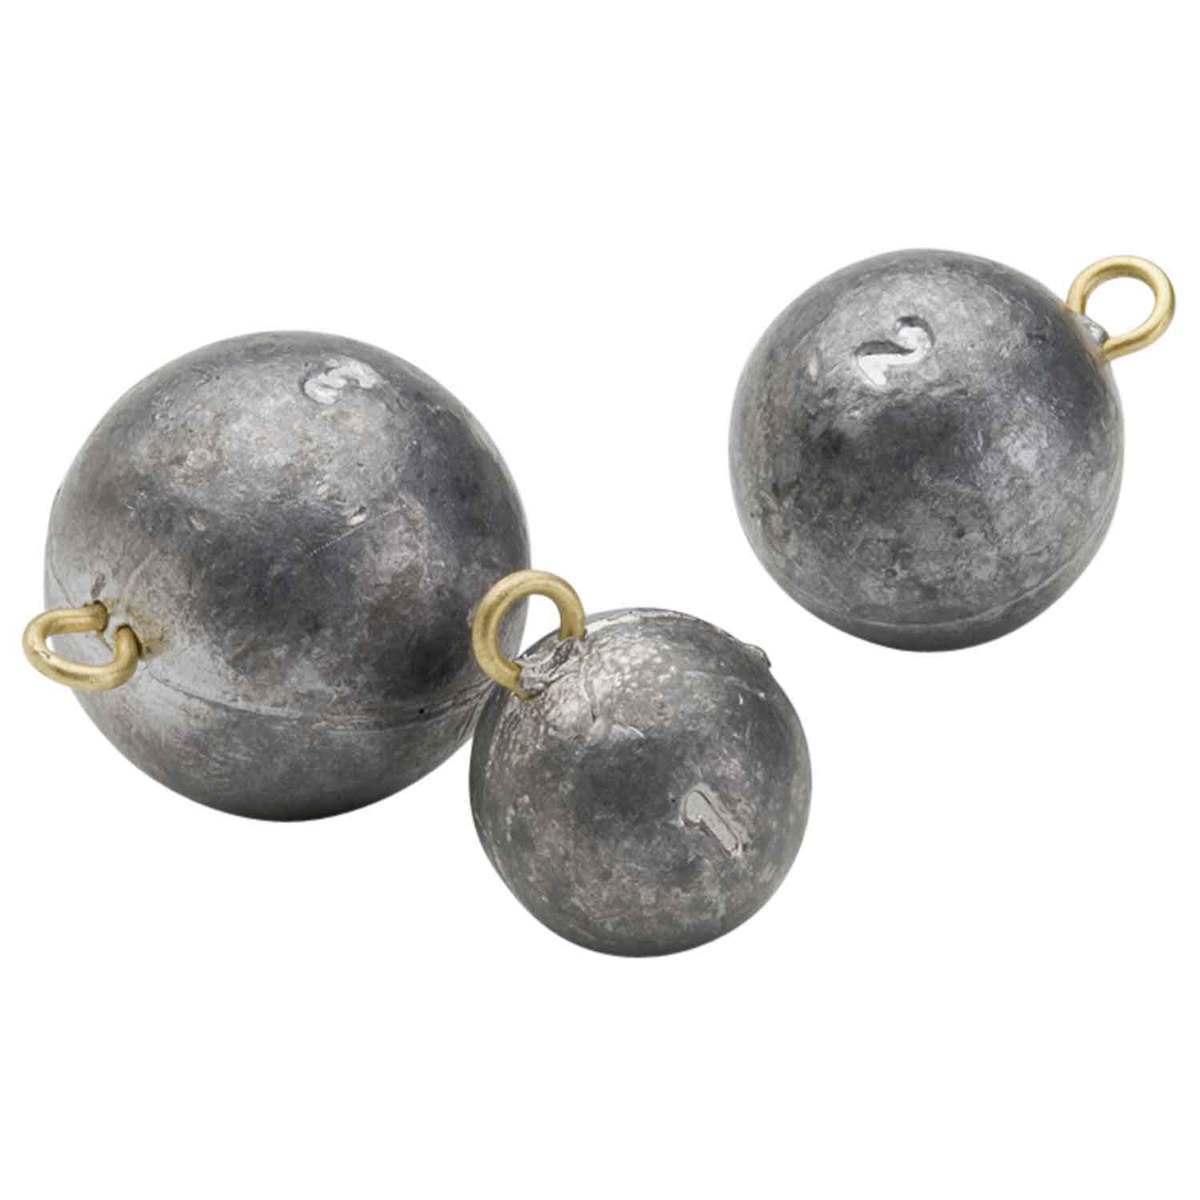 Bullet Weights CB600-13 Cannon Ball 6oz Priced Per 1